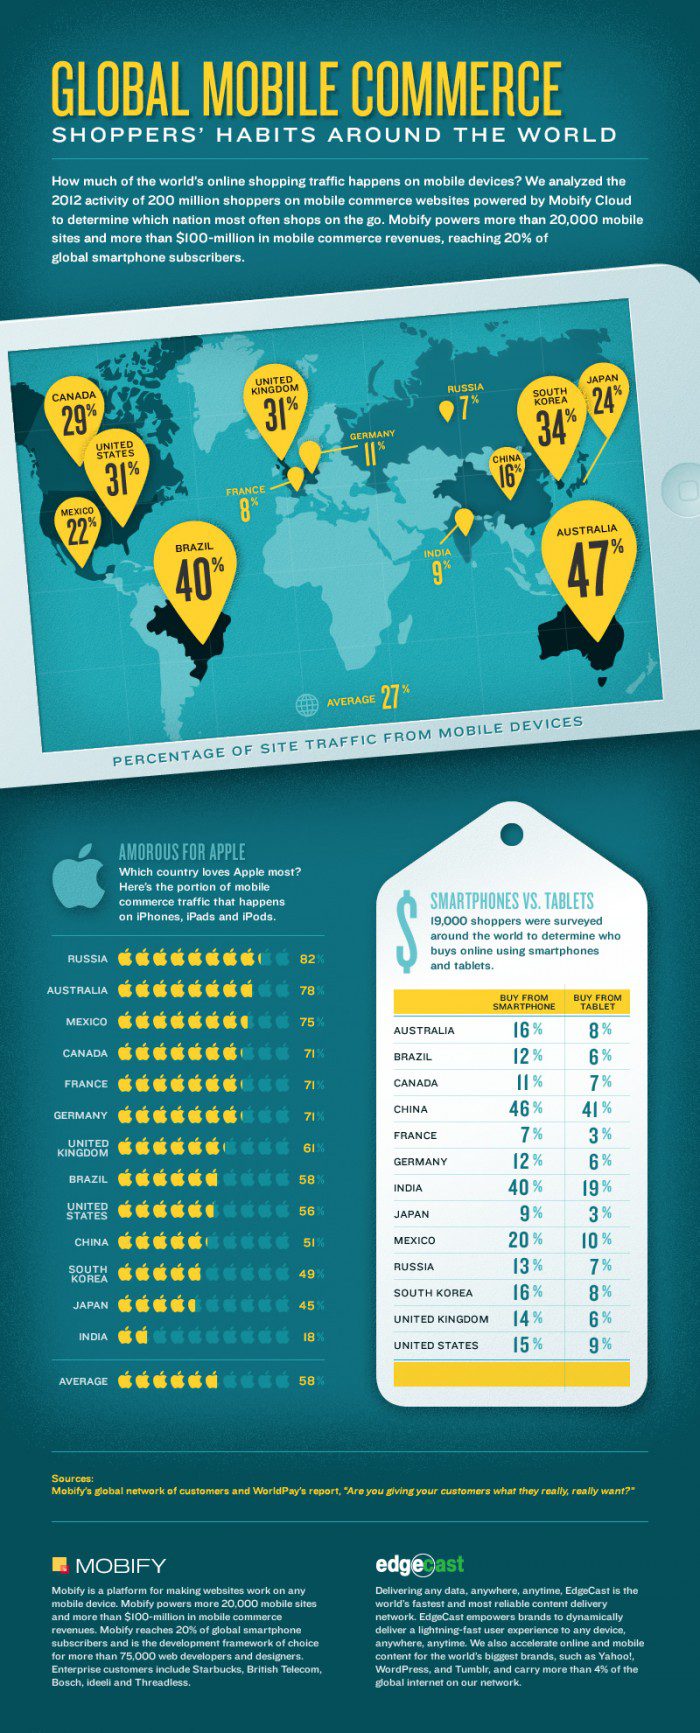 Global Mobile Commerce Infographic: Shoppers’ Habits Around the World